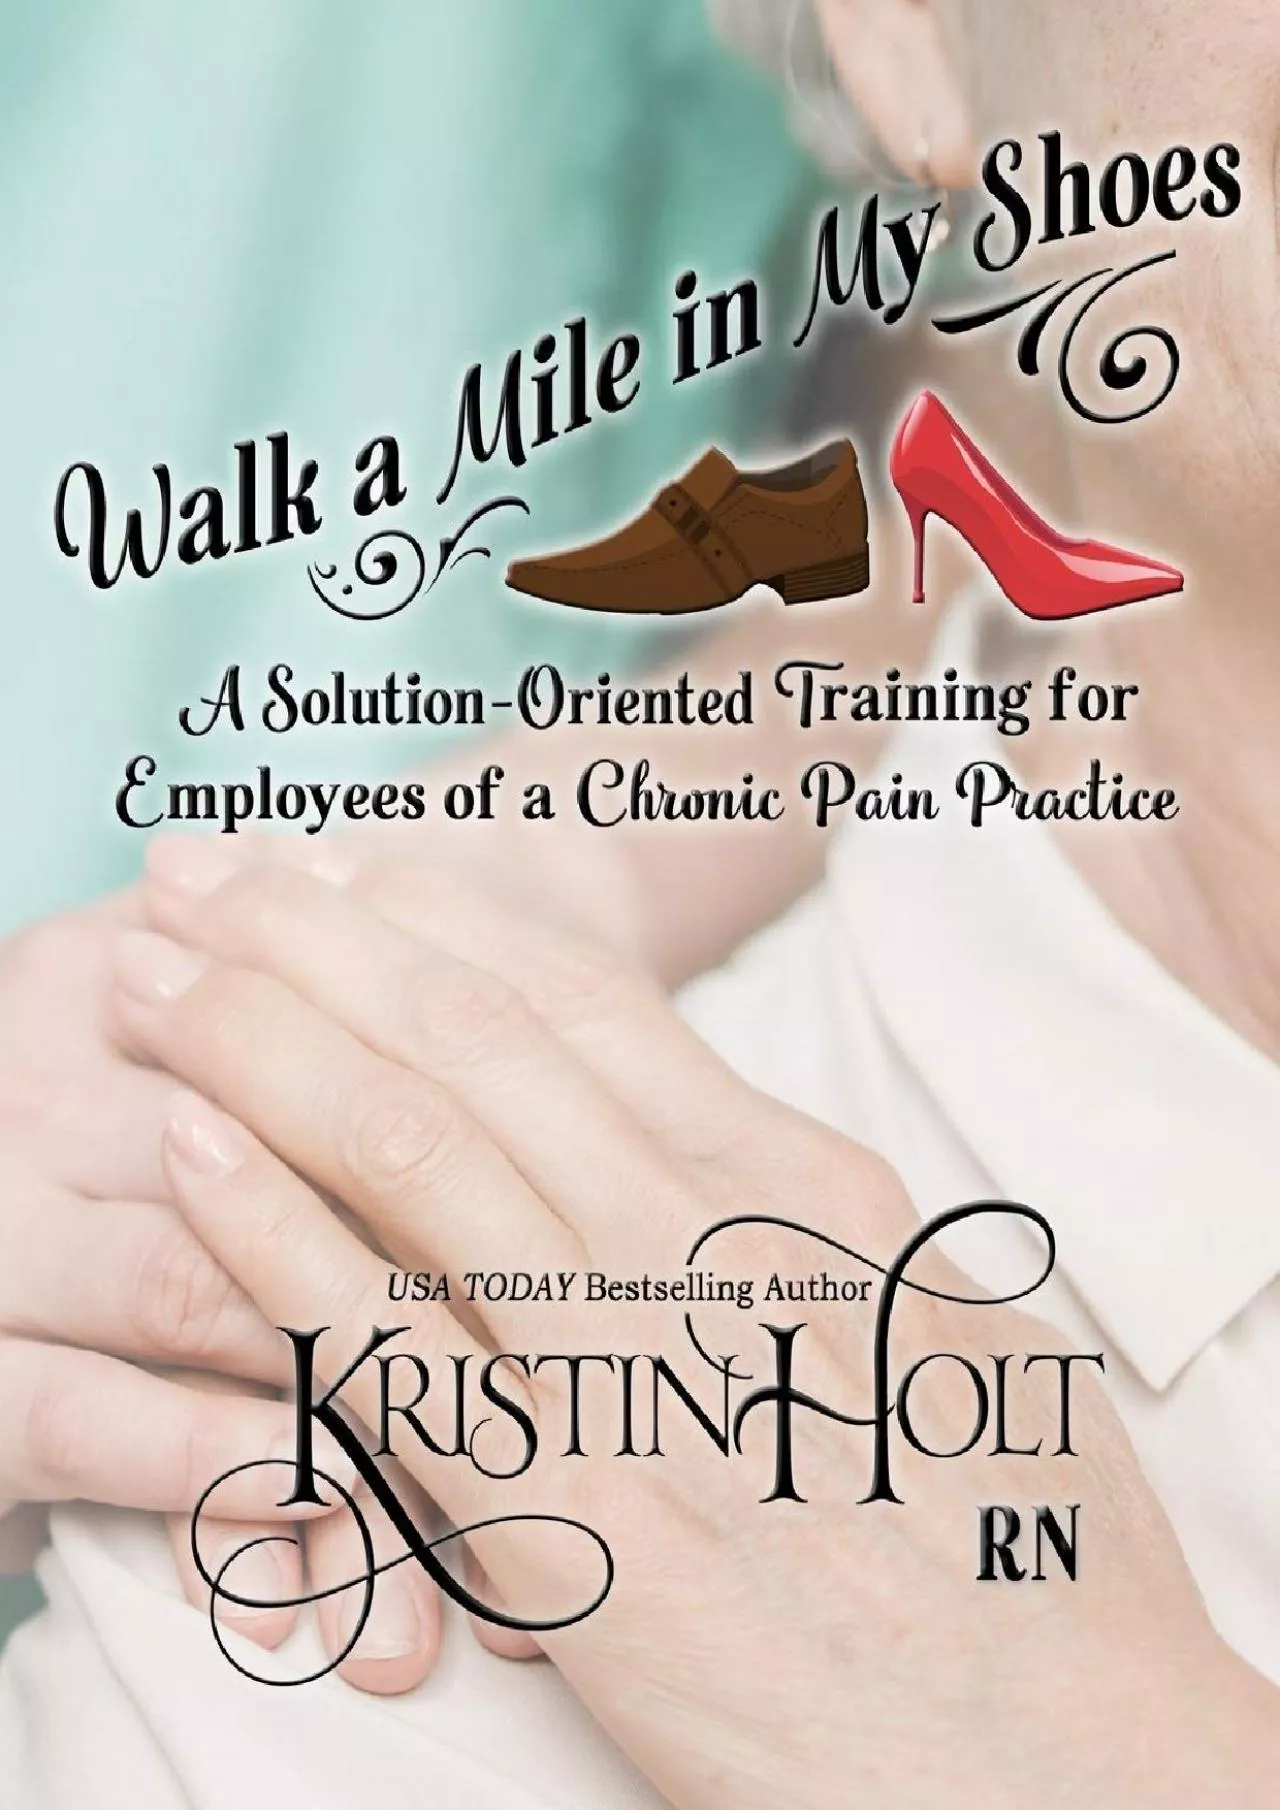 (BOOK)-Walk a Mile in My Shoes: A Solution-Oriented Training for Employees of a Chronic